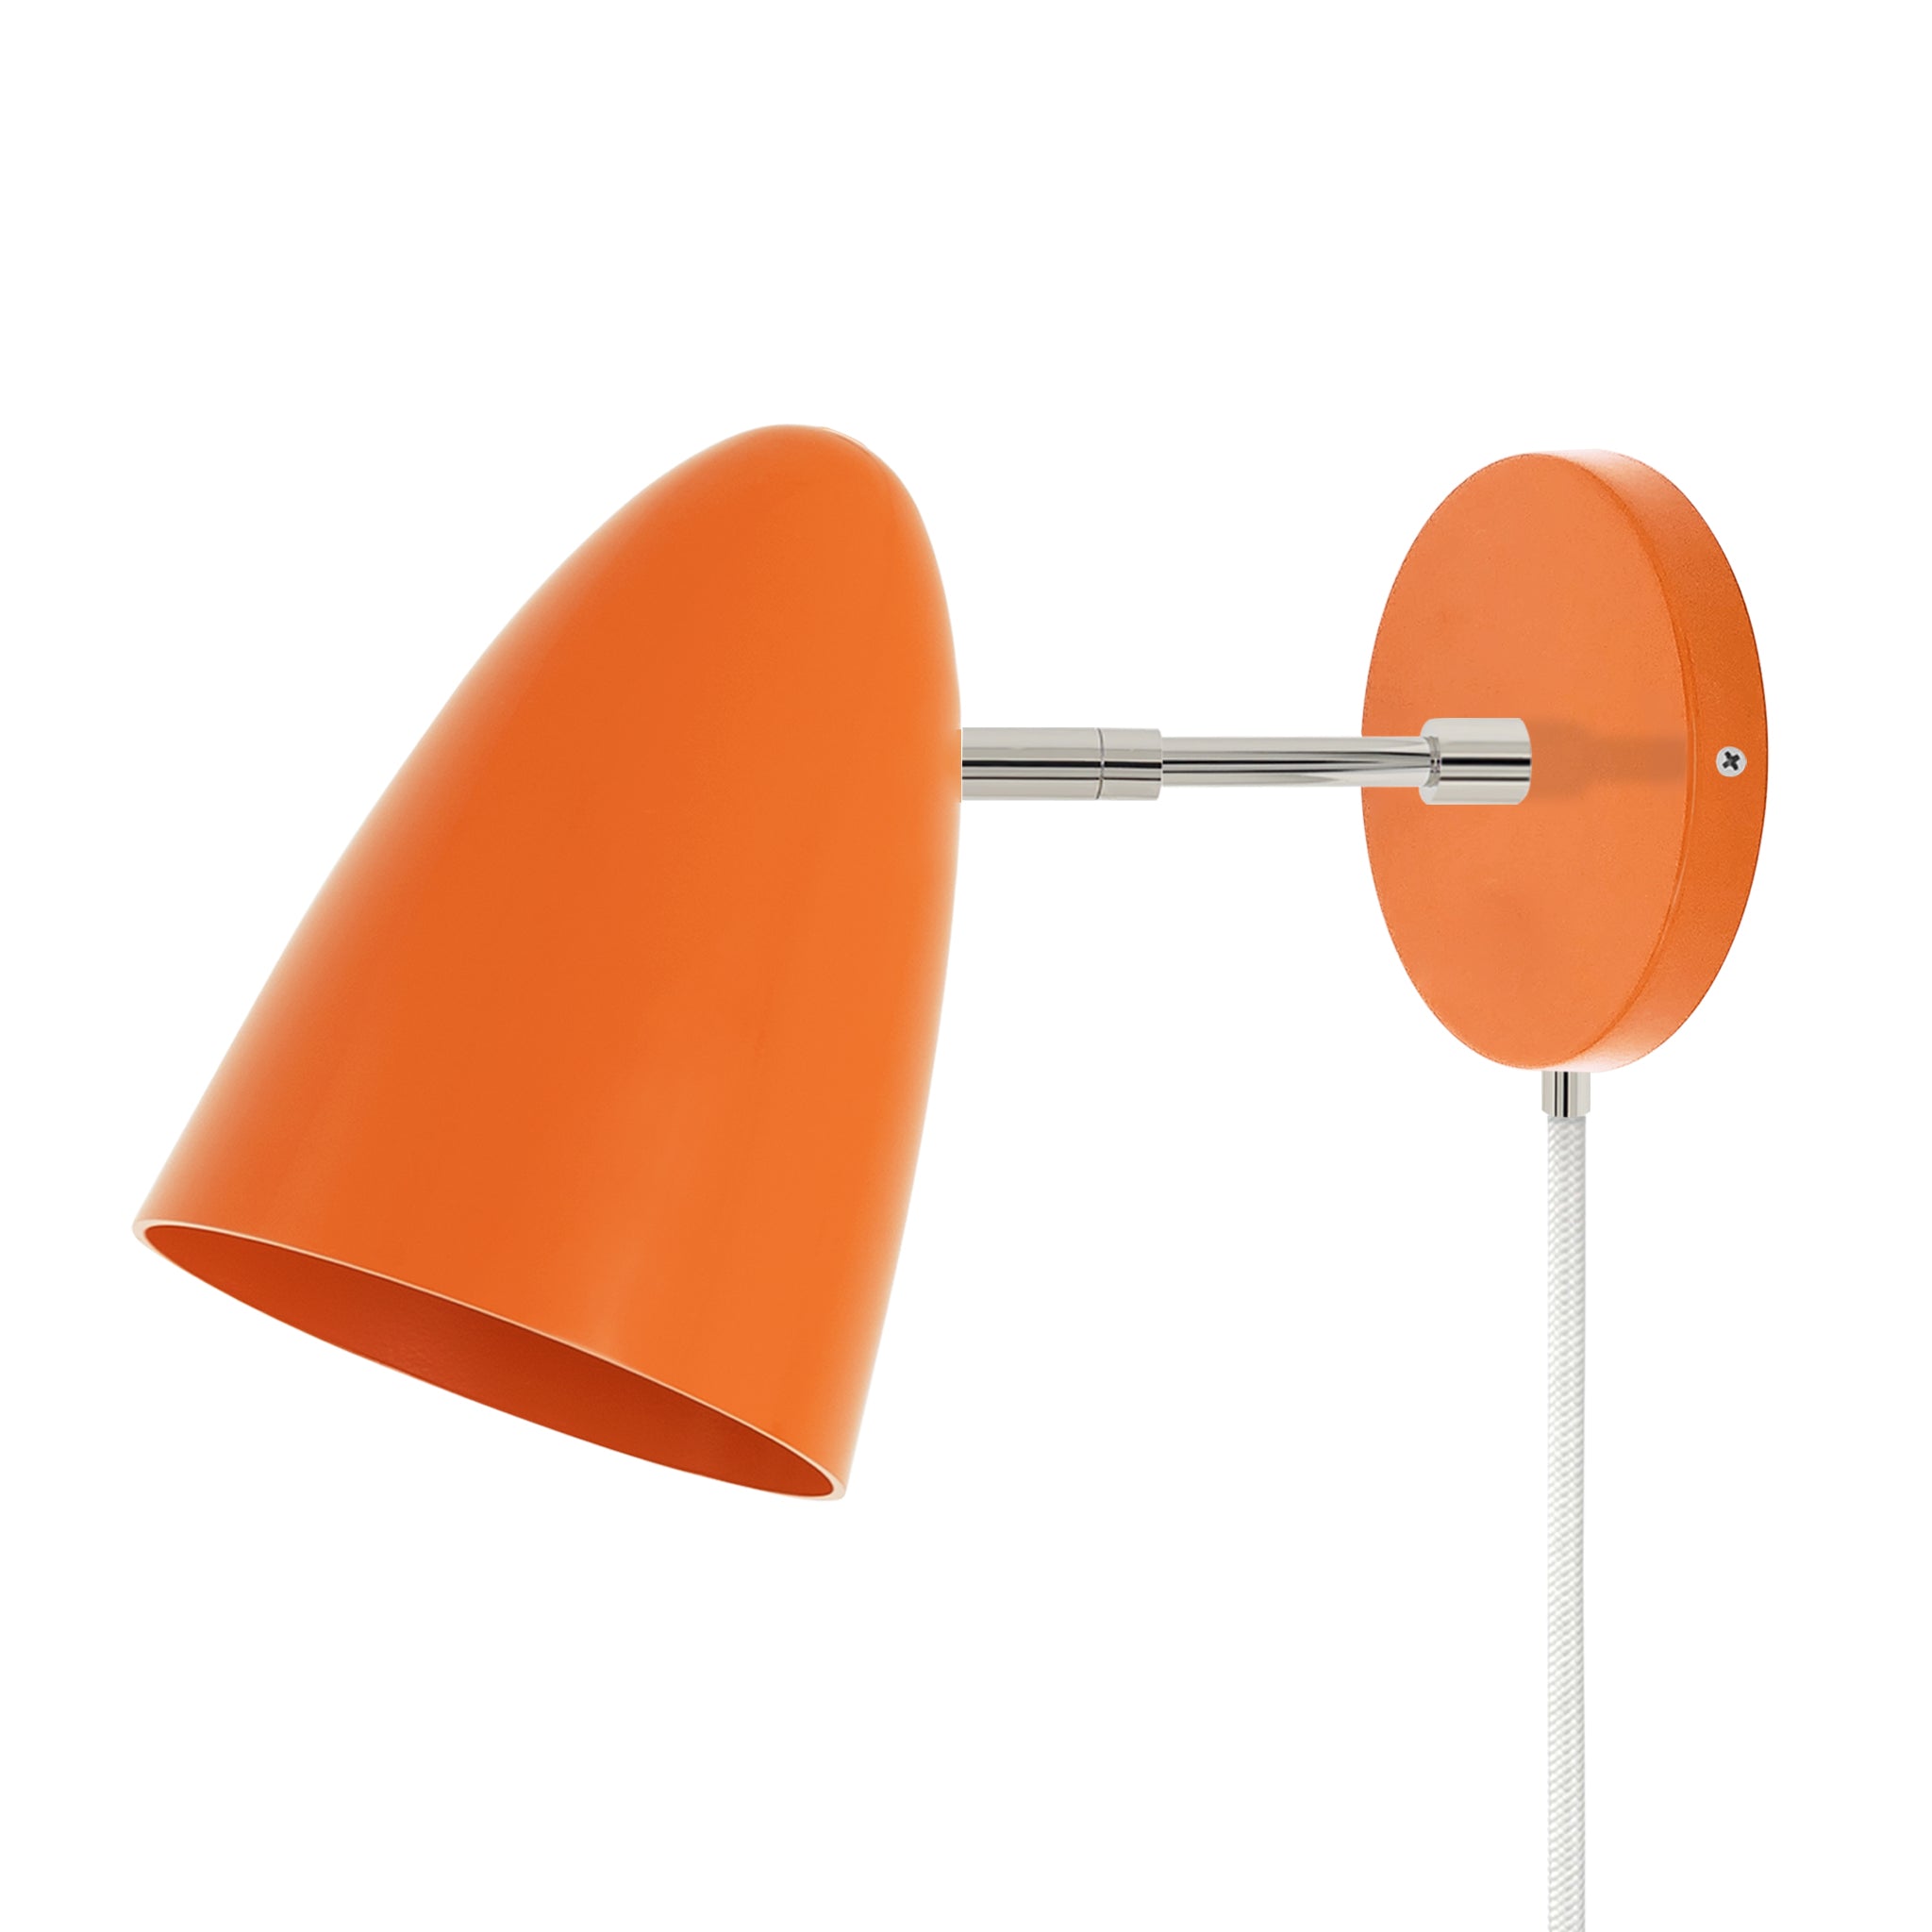 Nickel and orange color Boom plug-in sconce 3" arm Dutton Brown lighting